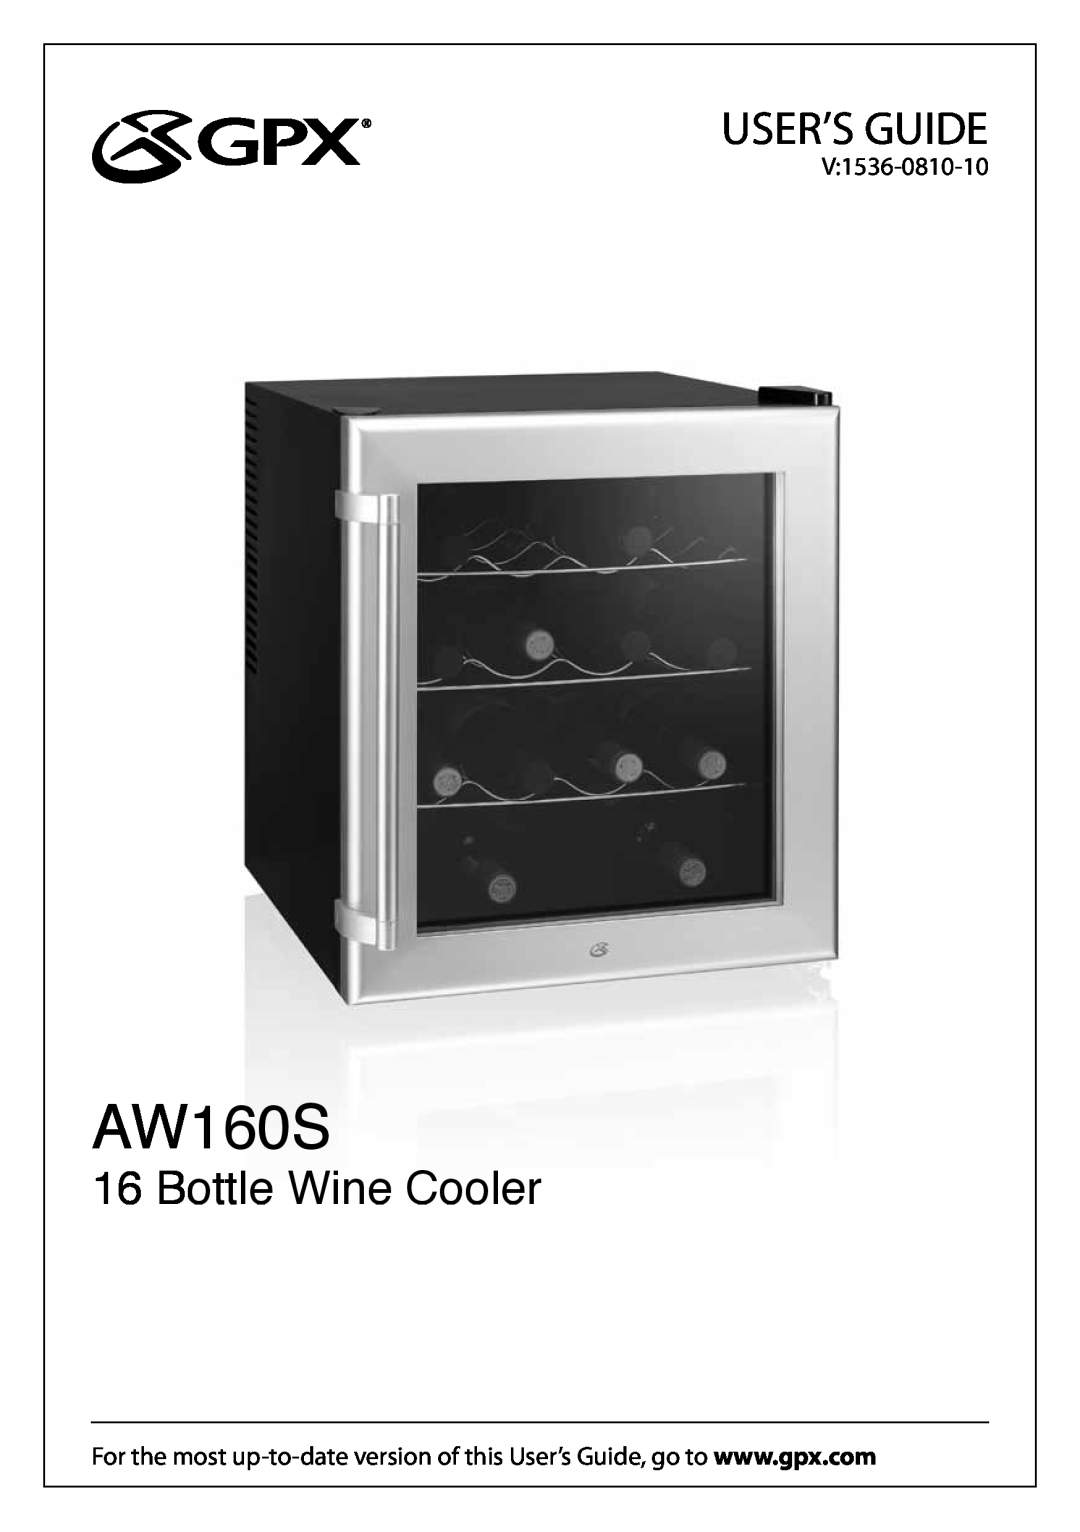 GPX 1536-0810-10 manual AW160S, User’S Guide, Bottle Wine Cooler 